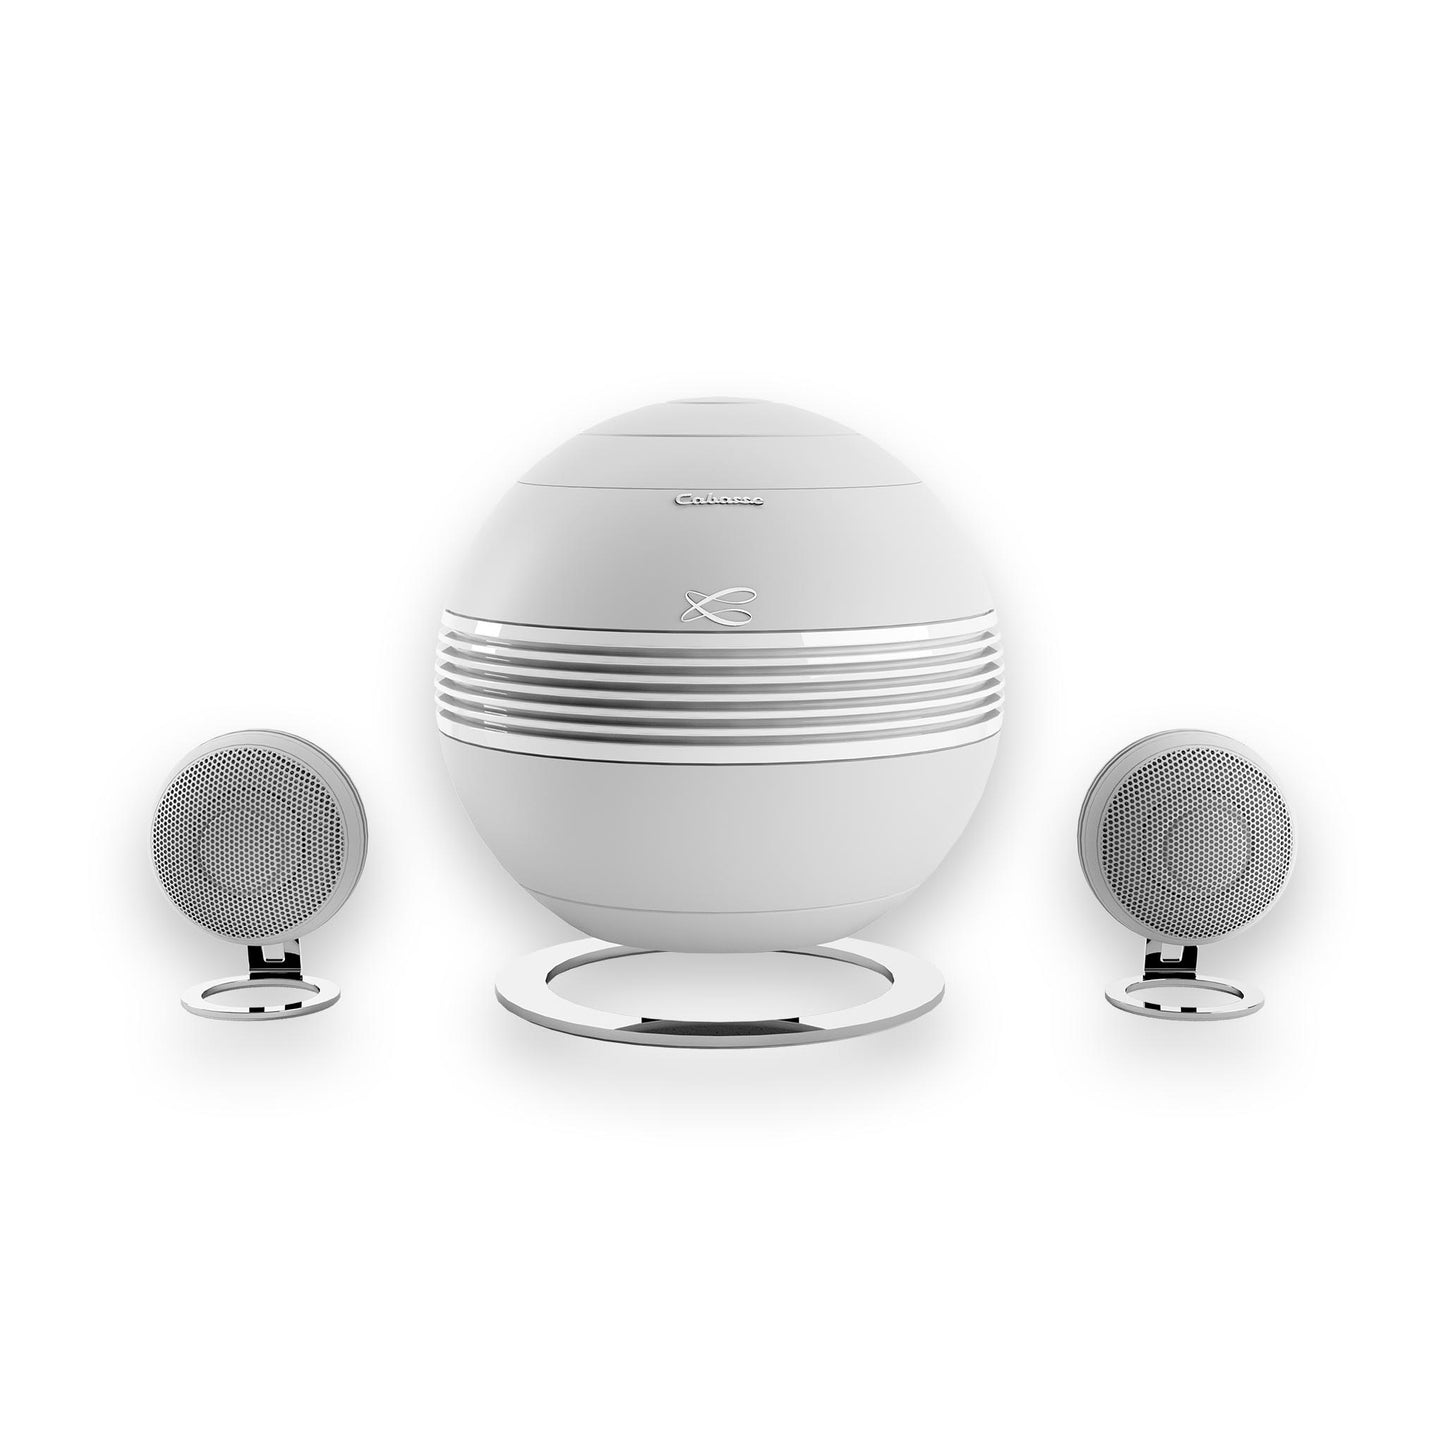 Cabasse The Pearl Keshi 2.1 Wireless Music System